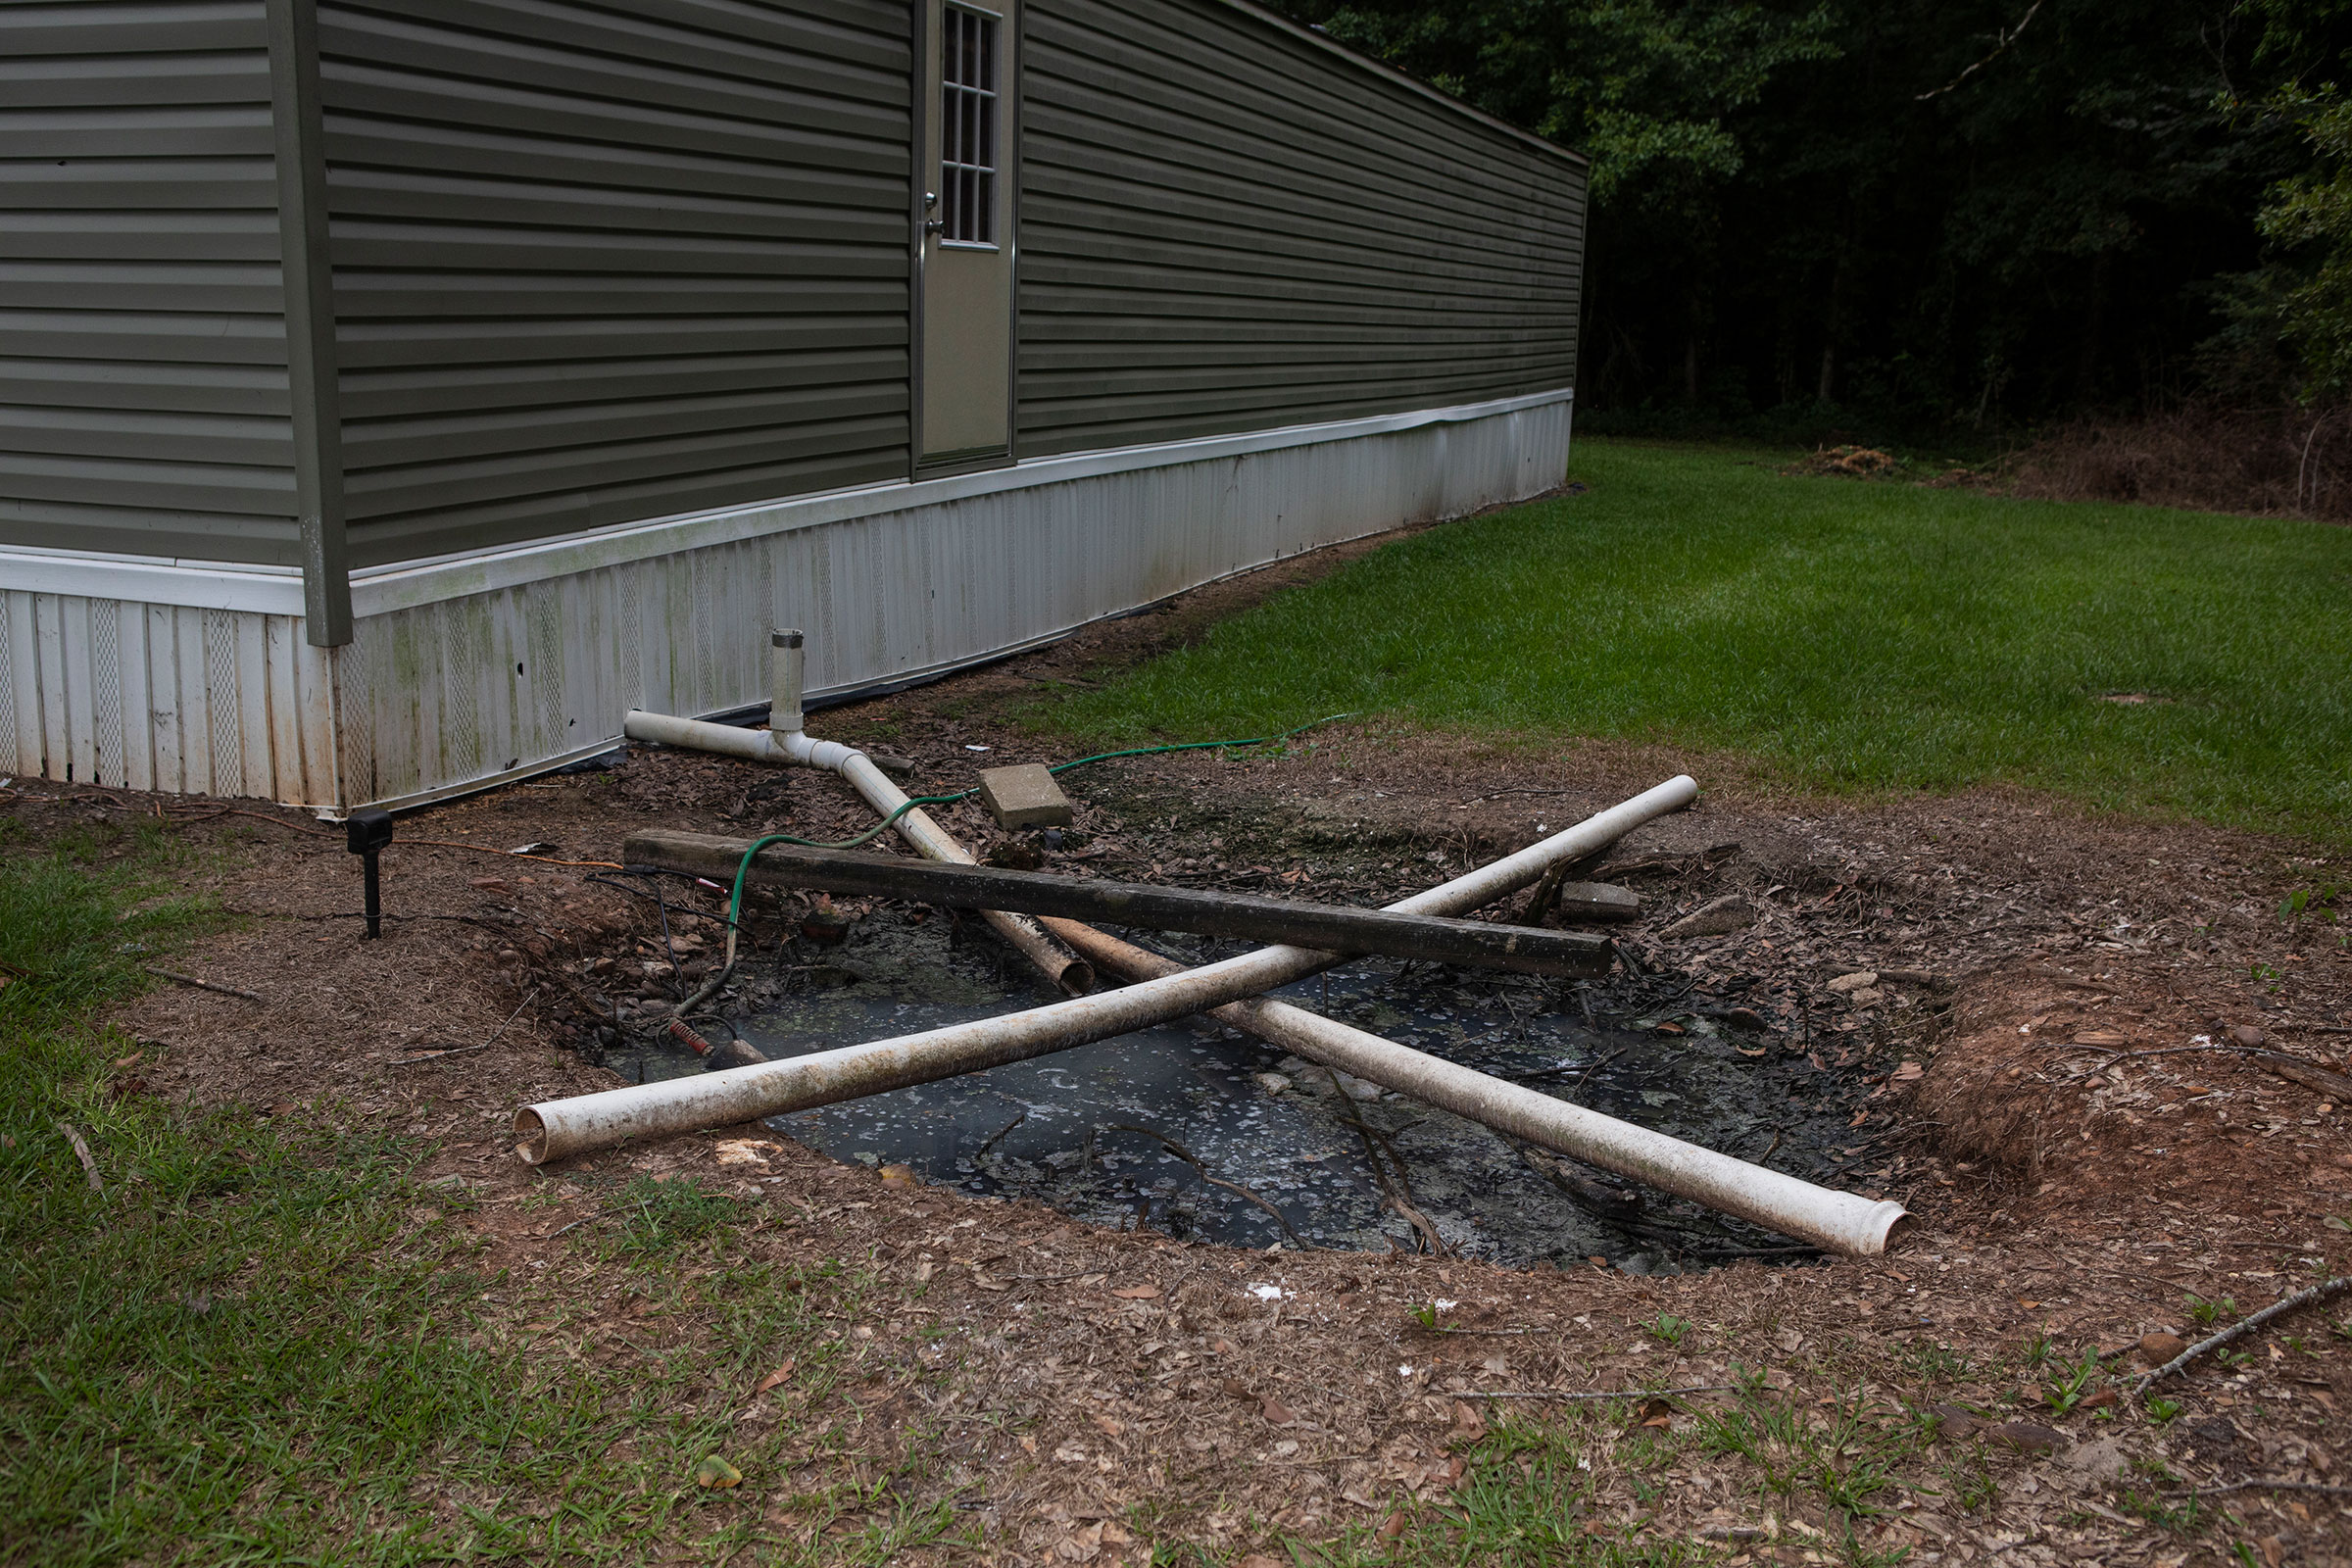 A straight pipe sewage solution in a resident's backyard in Lowndes County. (Charity Rachelle for TIME)